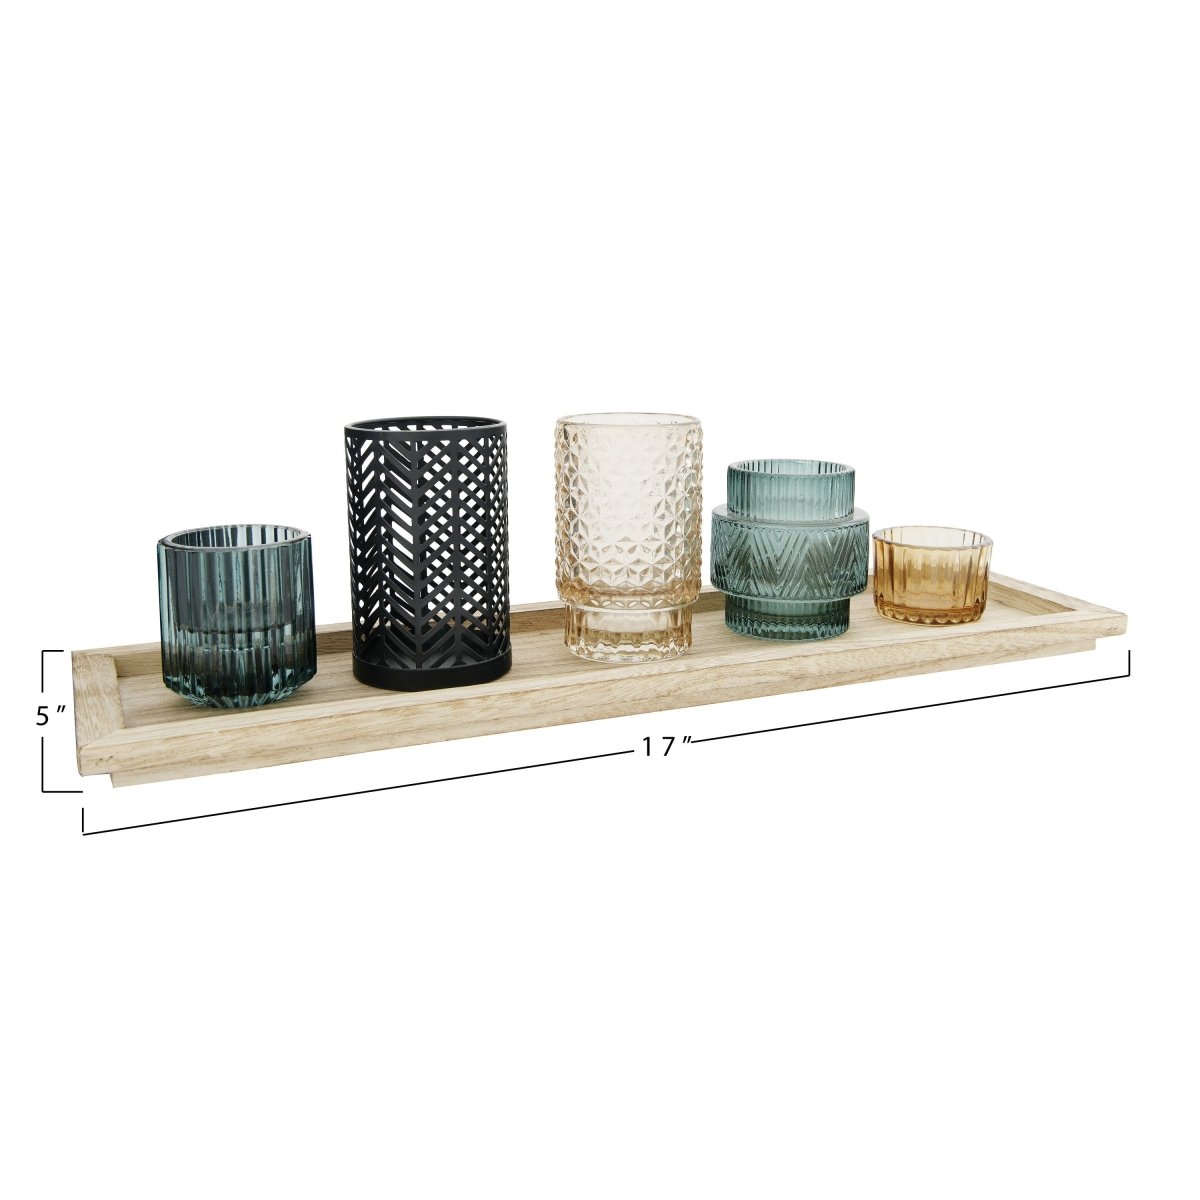 lily & onyx Embossed Glass & Metal Tealight Holders On Rectangle Wood Tray - lily & onyx